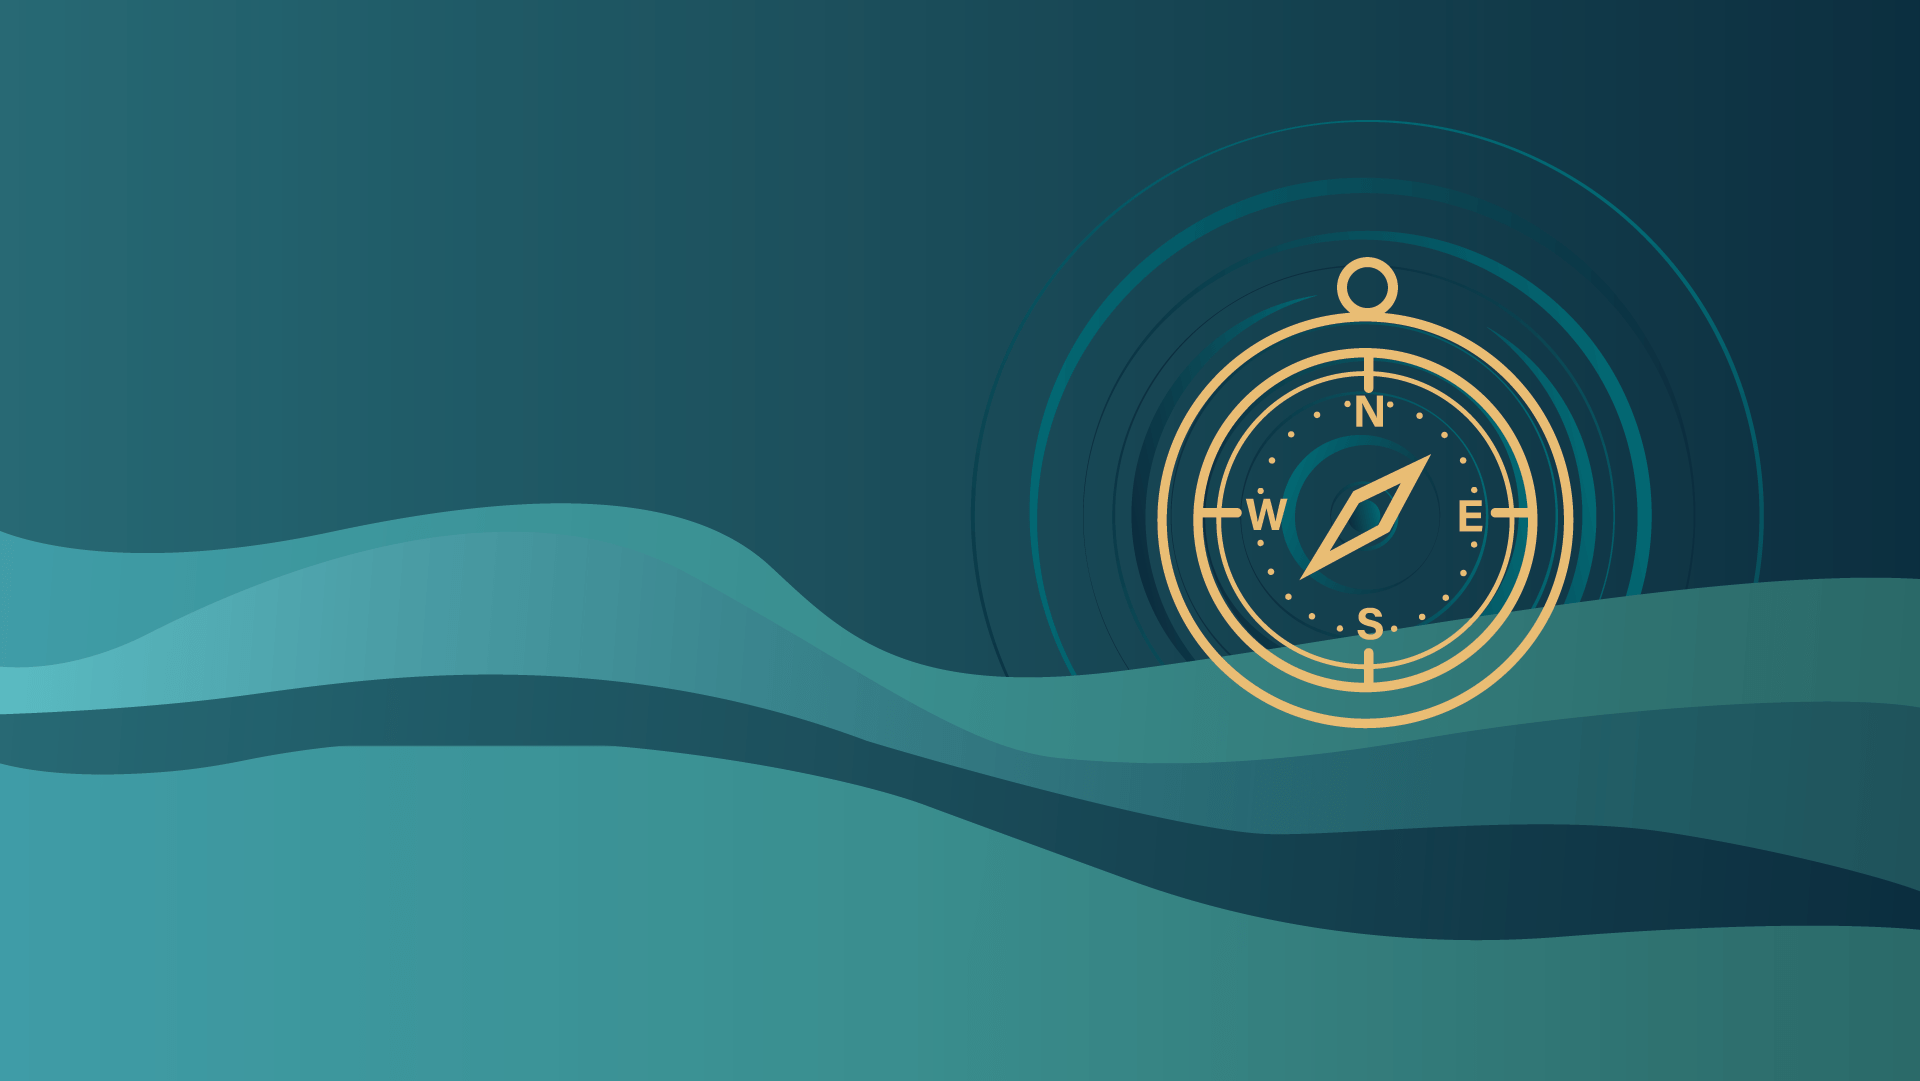 A gold colored compass on a wavy blue and green background